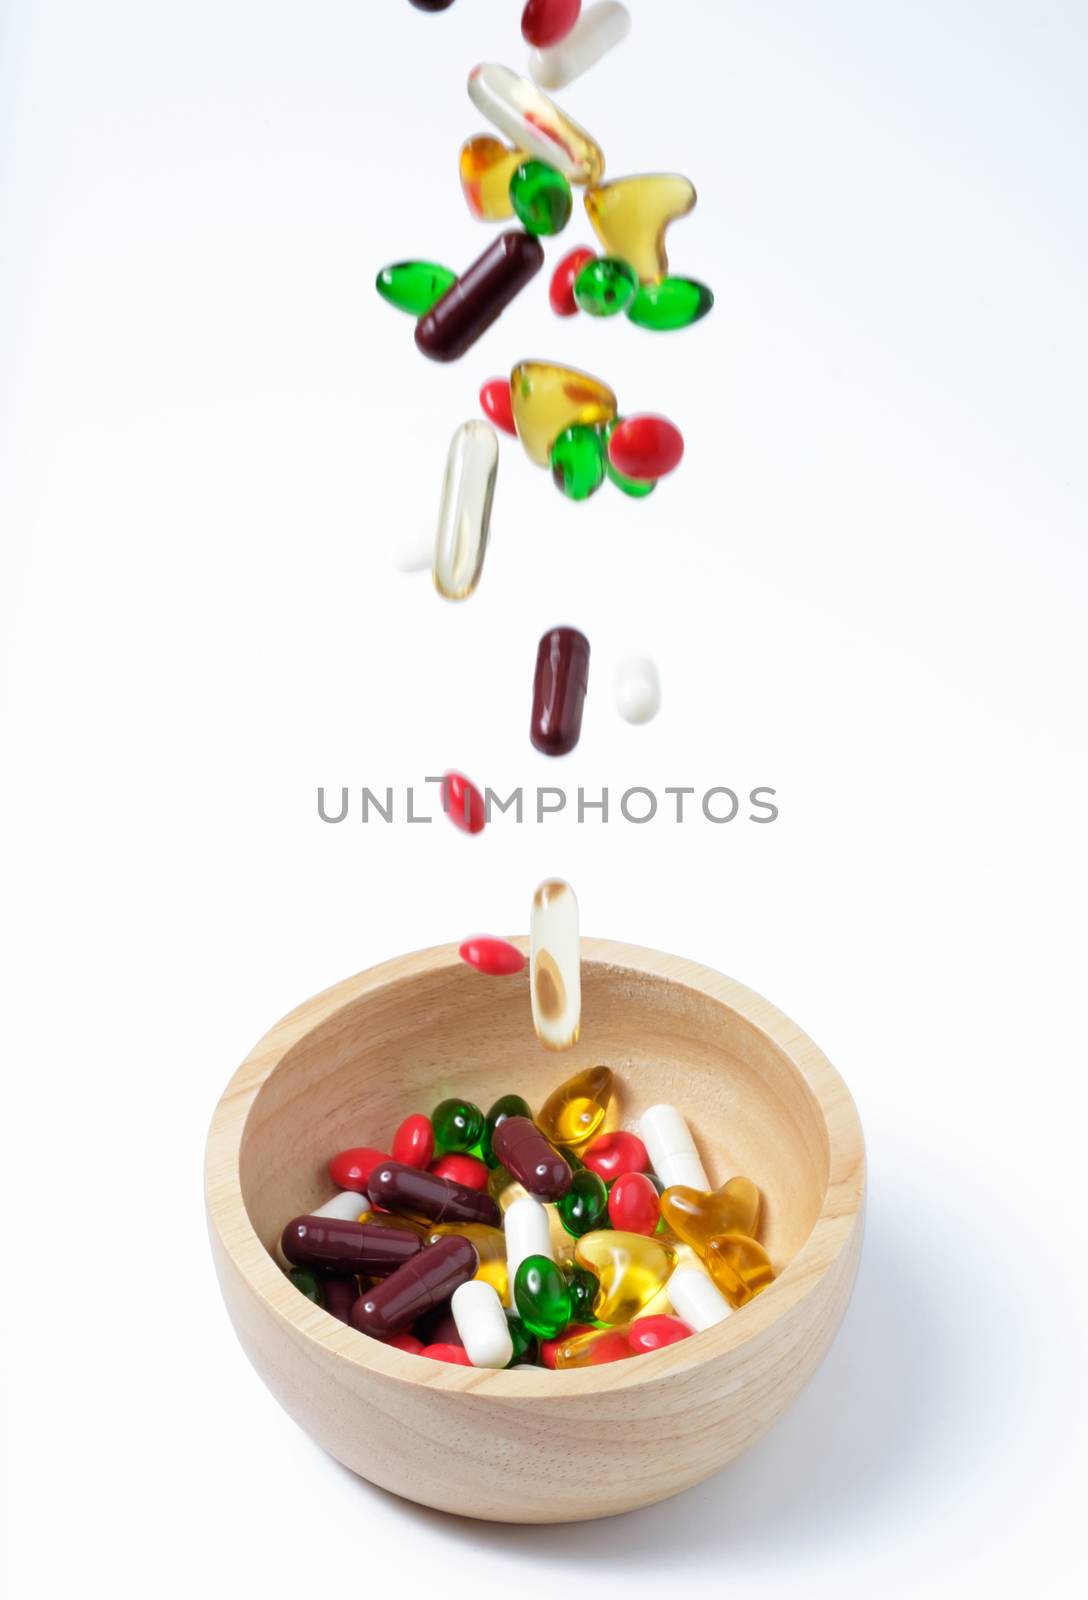 falling of colorful vitamin or medicine in to the wooden bowl